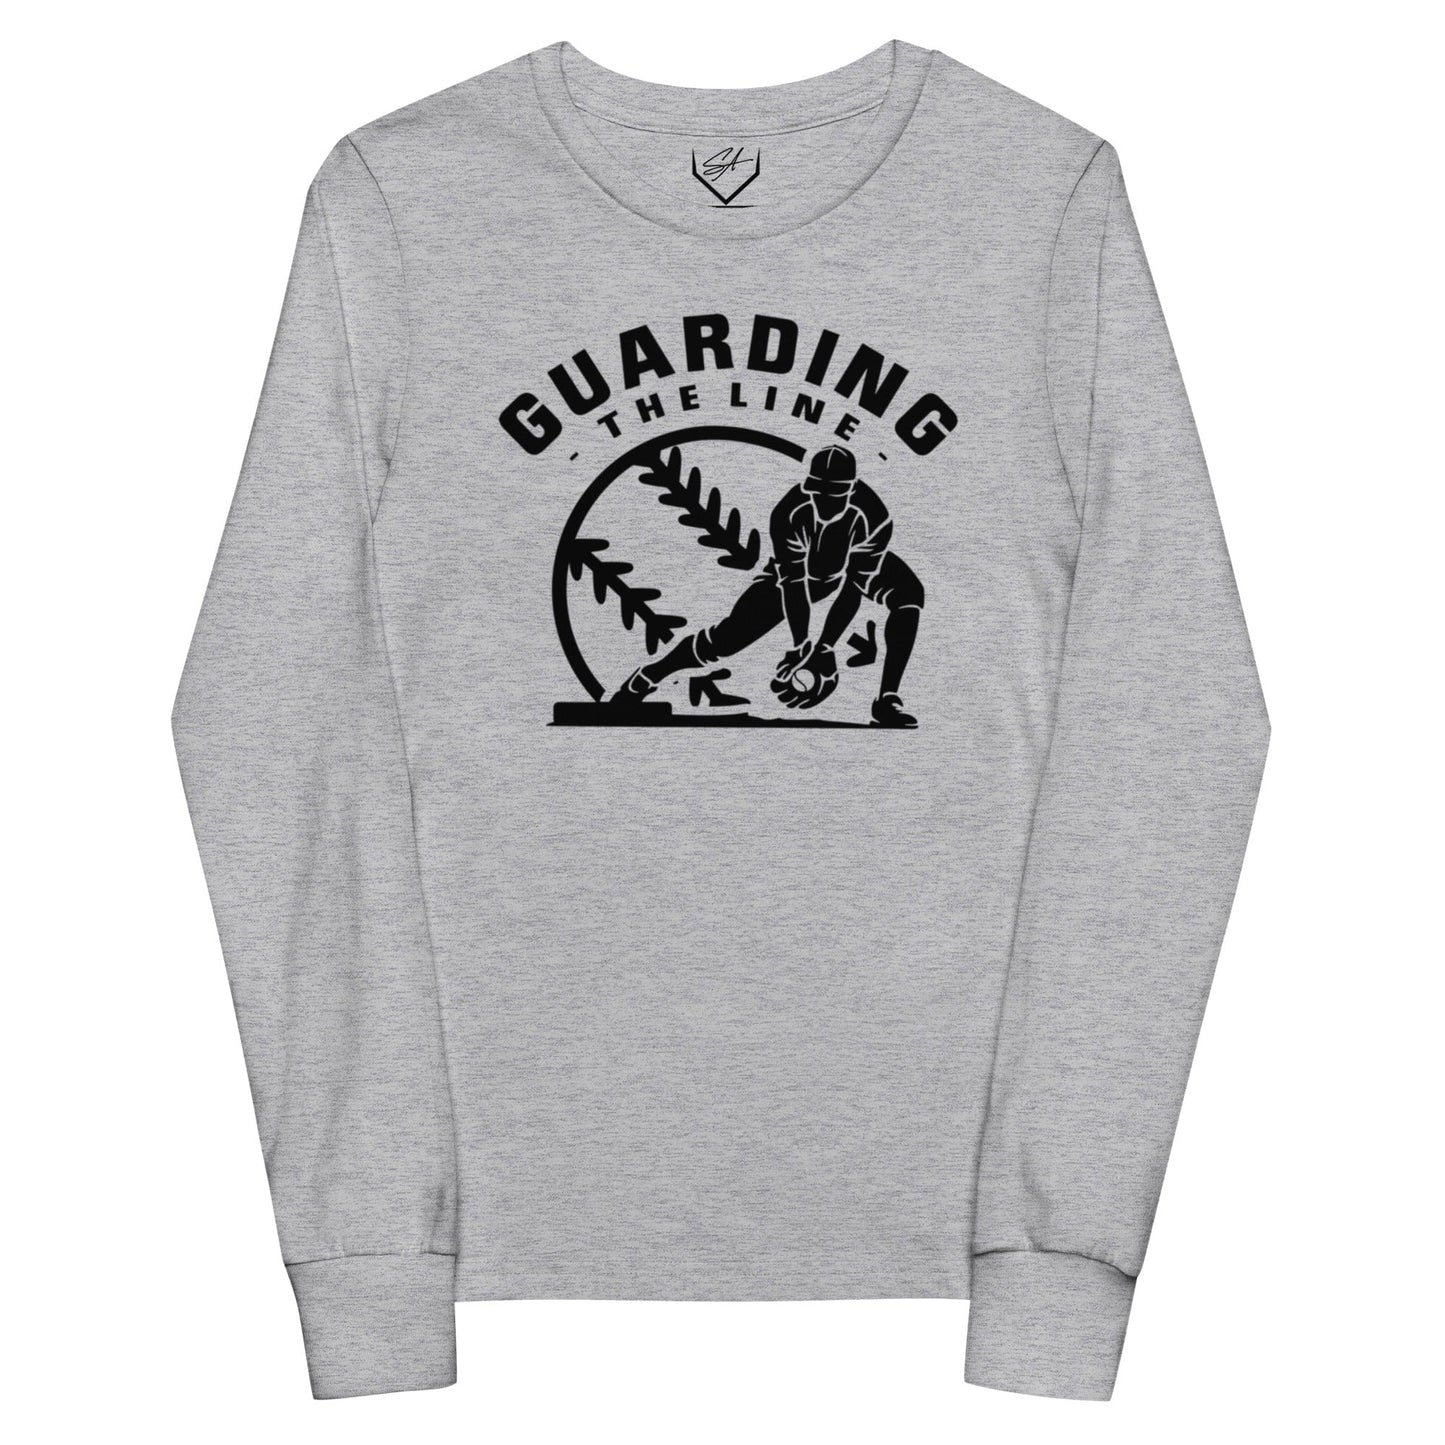 Guarding The Line - Youth Long Sleeve